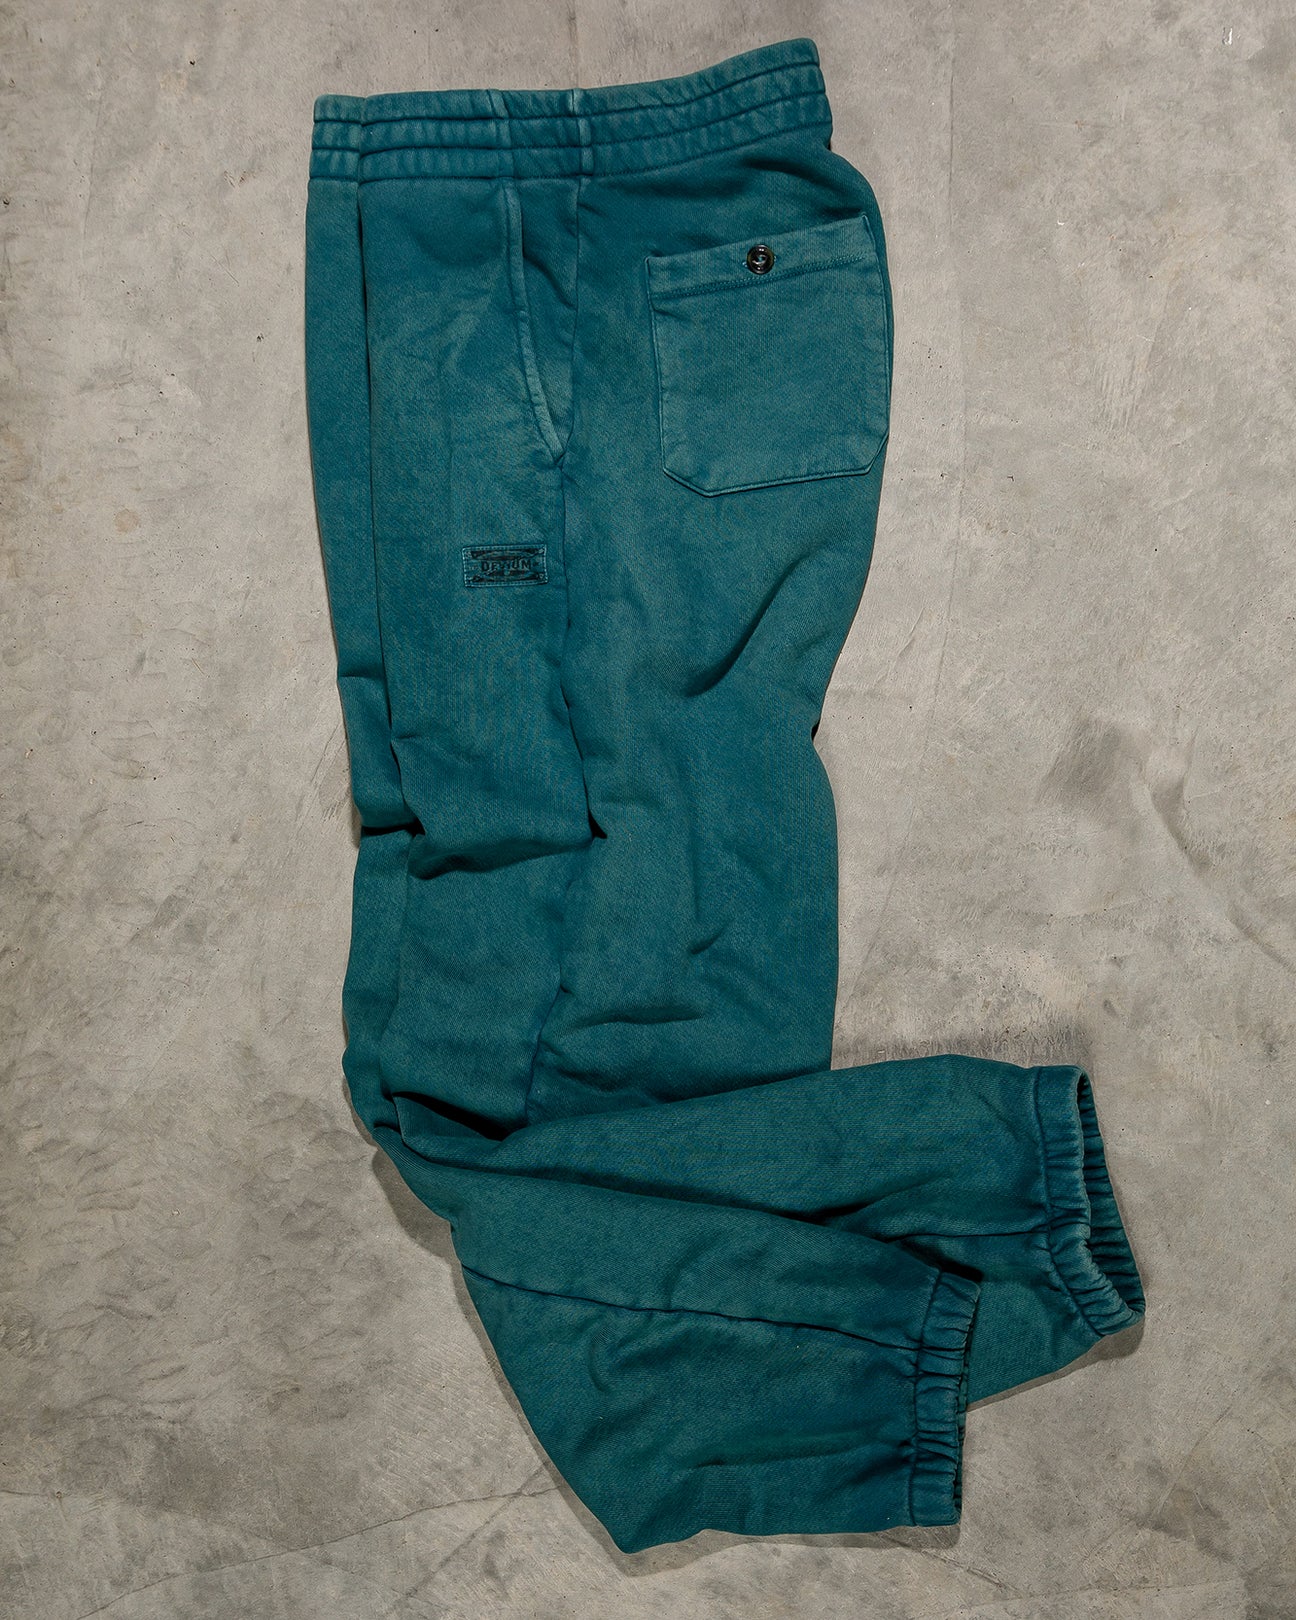 Devium USA Fleetwood French Terry Sweatpant posted by ProdOrigin USA in Men's Apparel